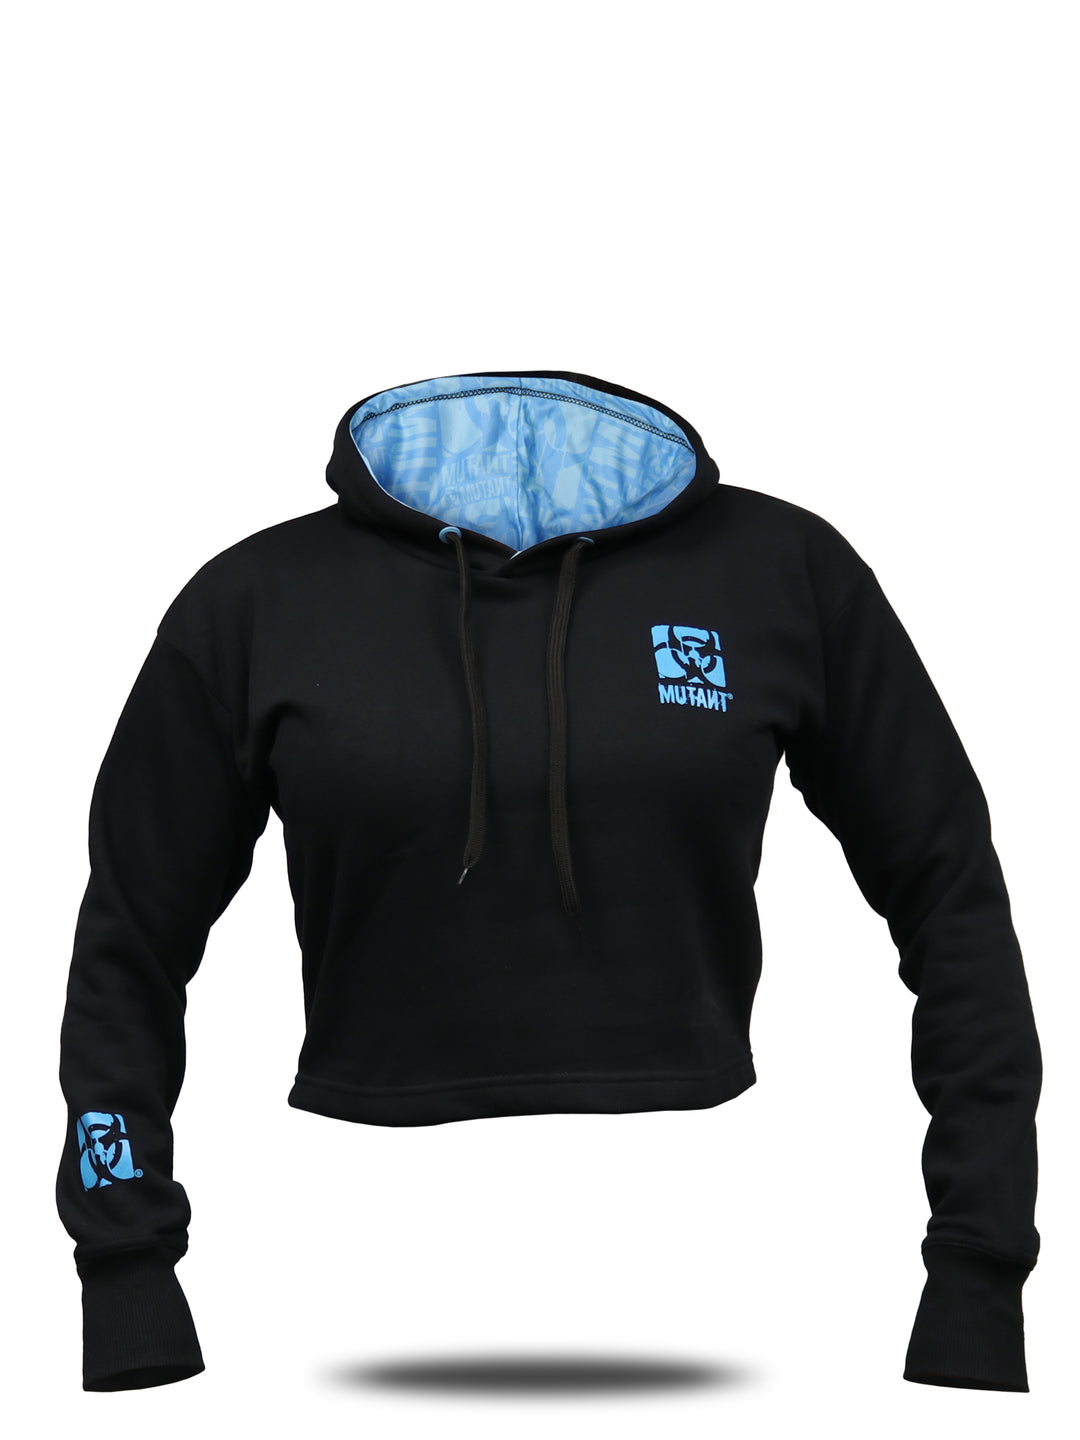 Black Mutant Thick Script Women's Gym Crop Hoodie with blue logo on chest and wrist, featuring blue internal hood lining with watermarked Mutant logo. White background.